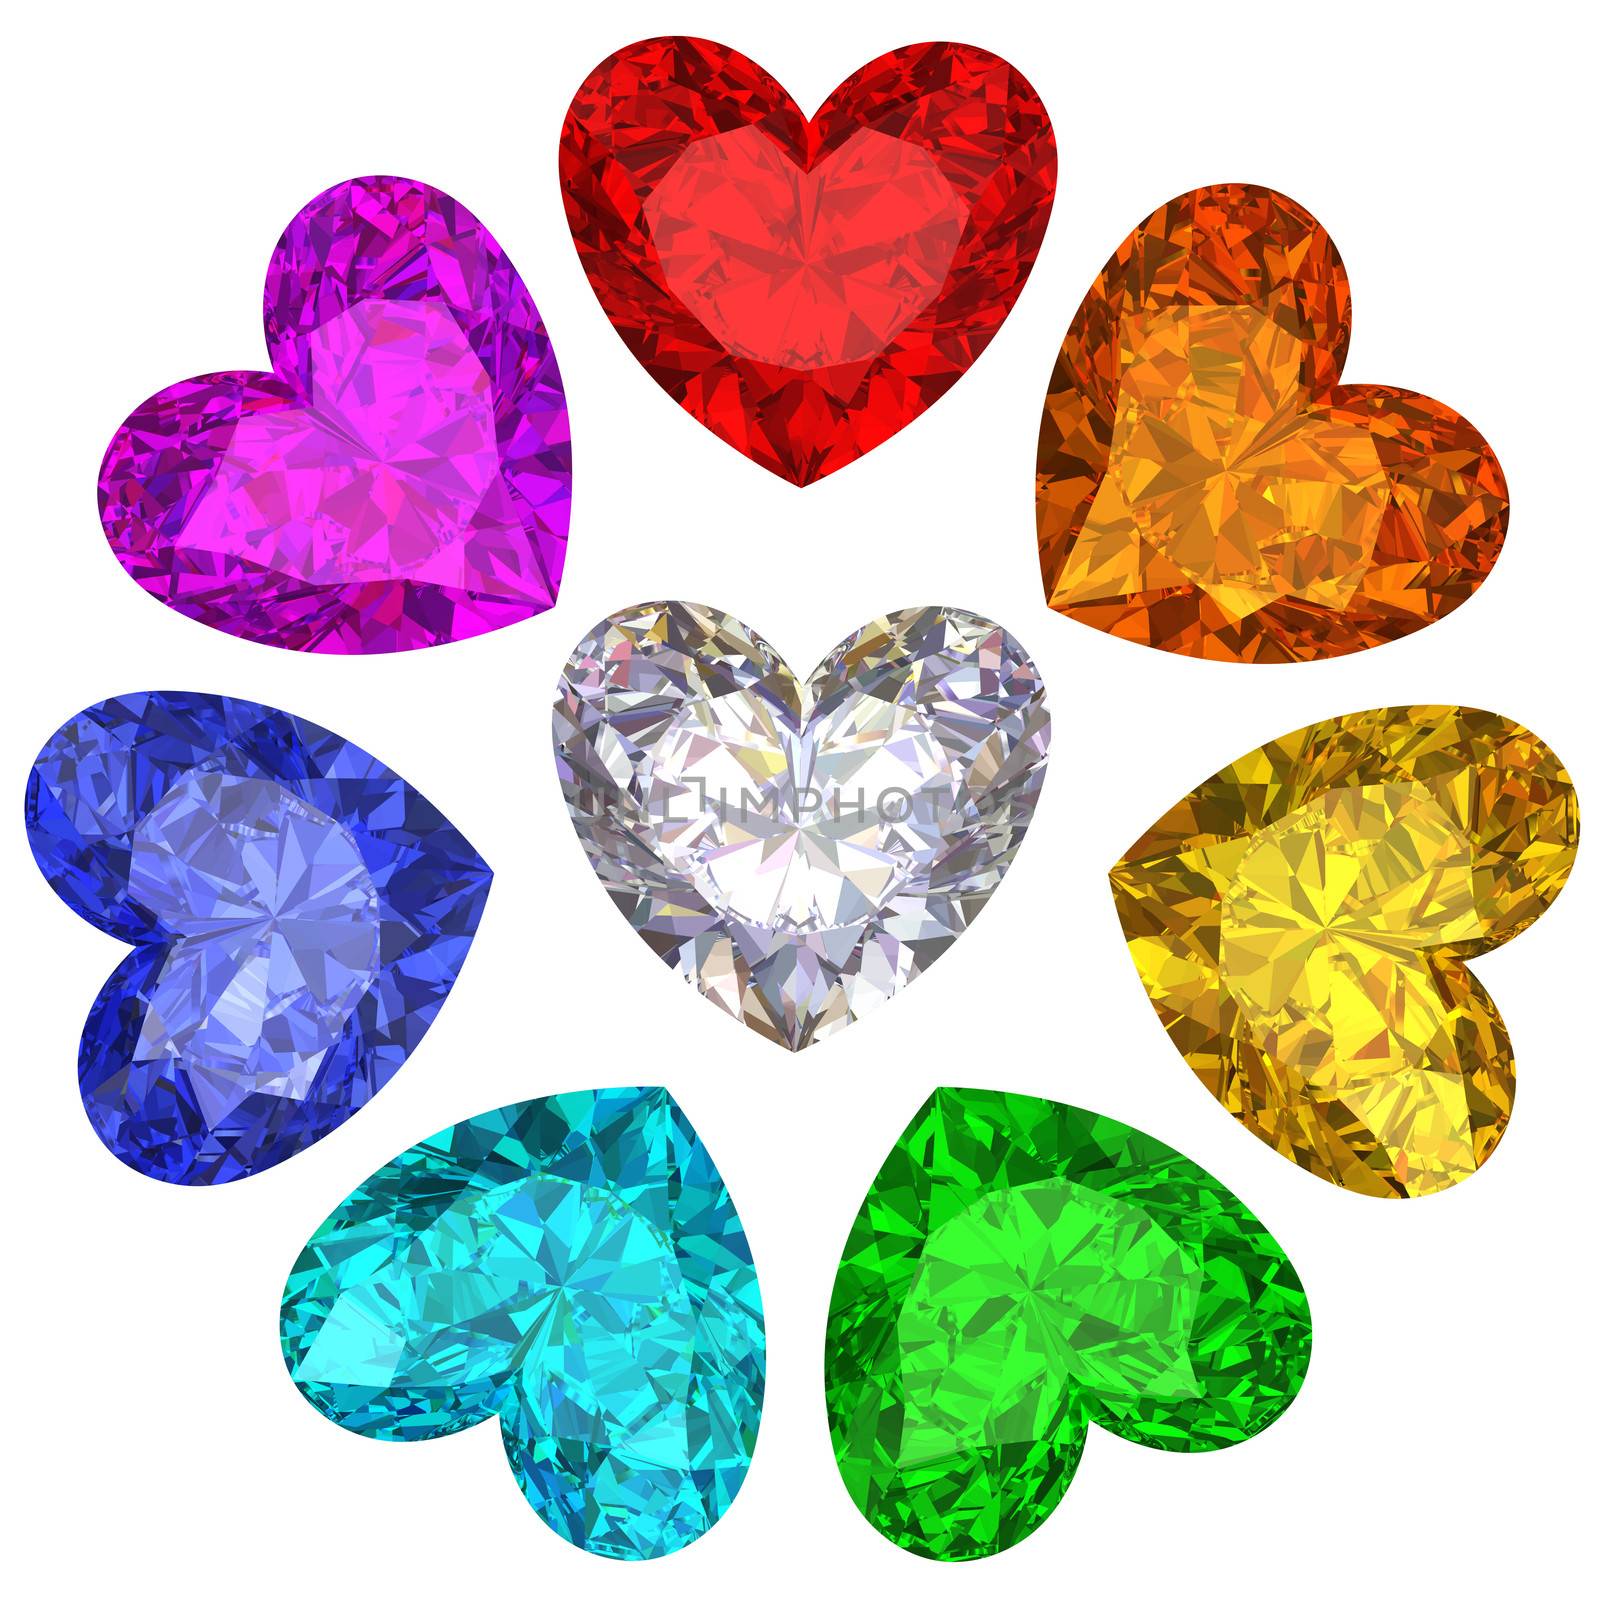 Colorful gems in shape of heart isolated on white background. High resolution 3D render